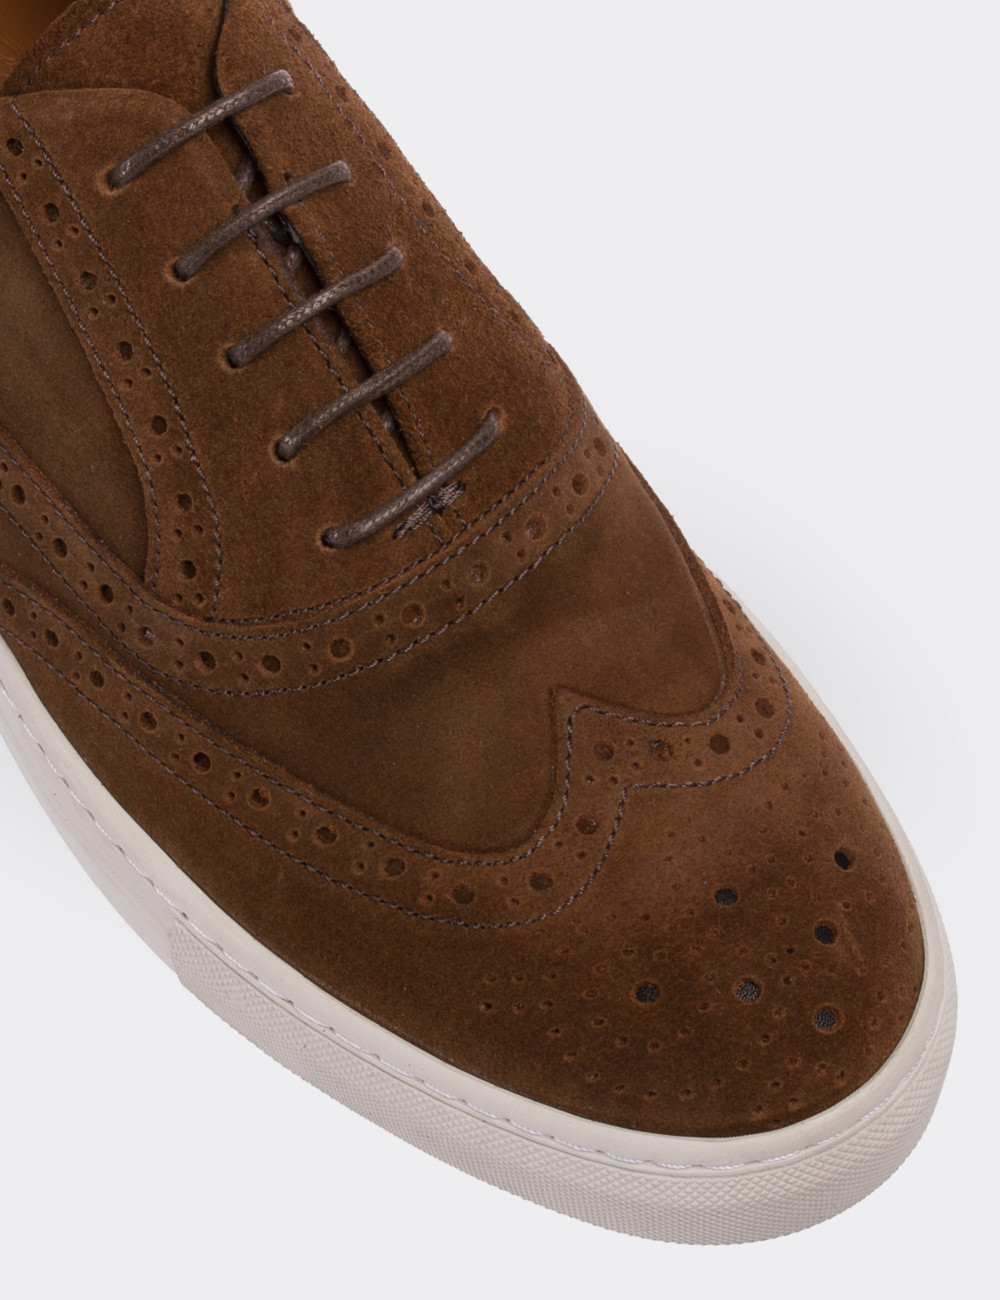 Tan Suede Leather Sneakers - 01637MKHVC02